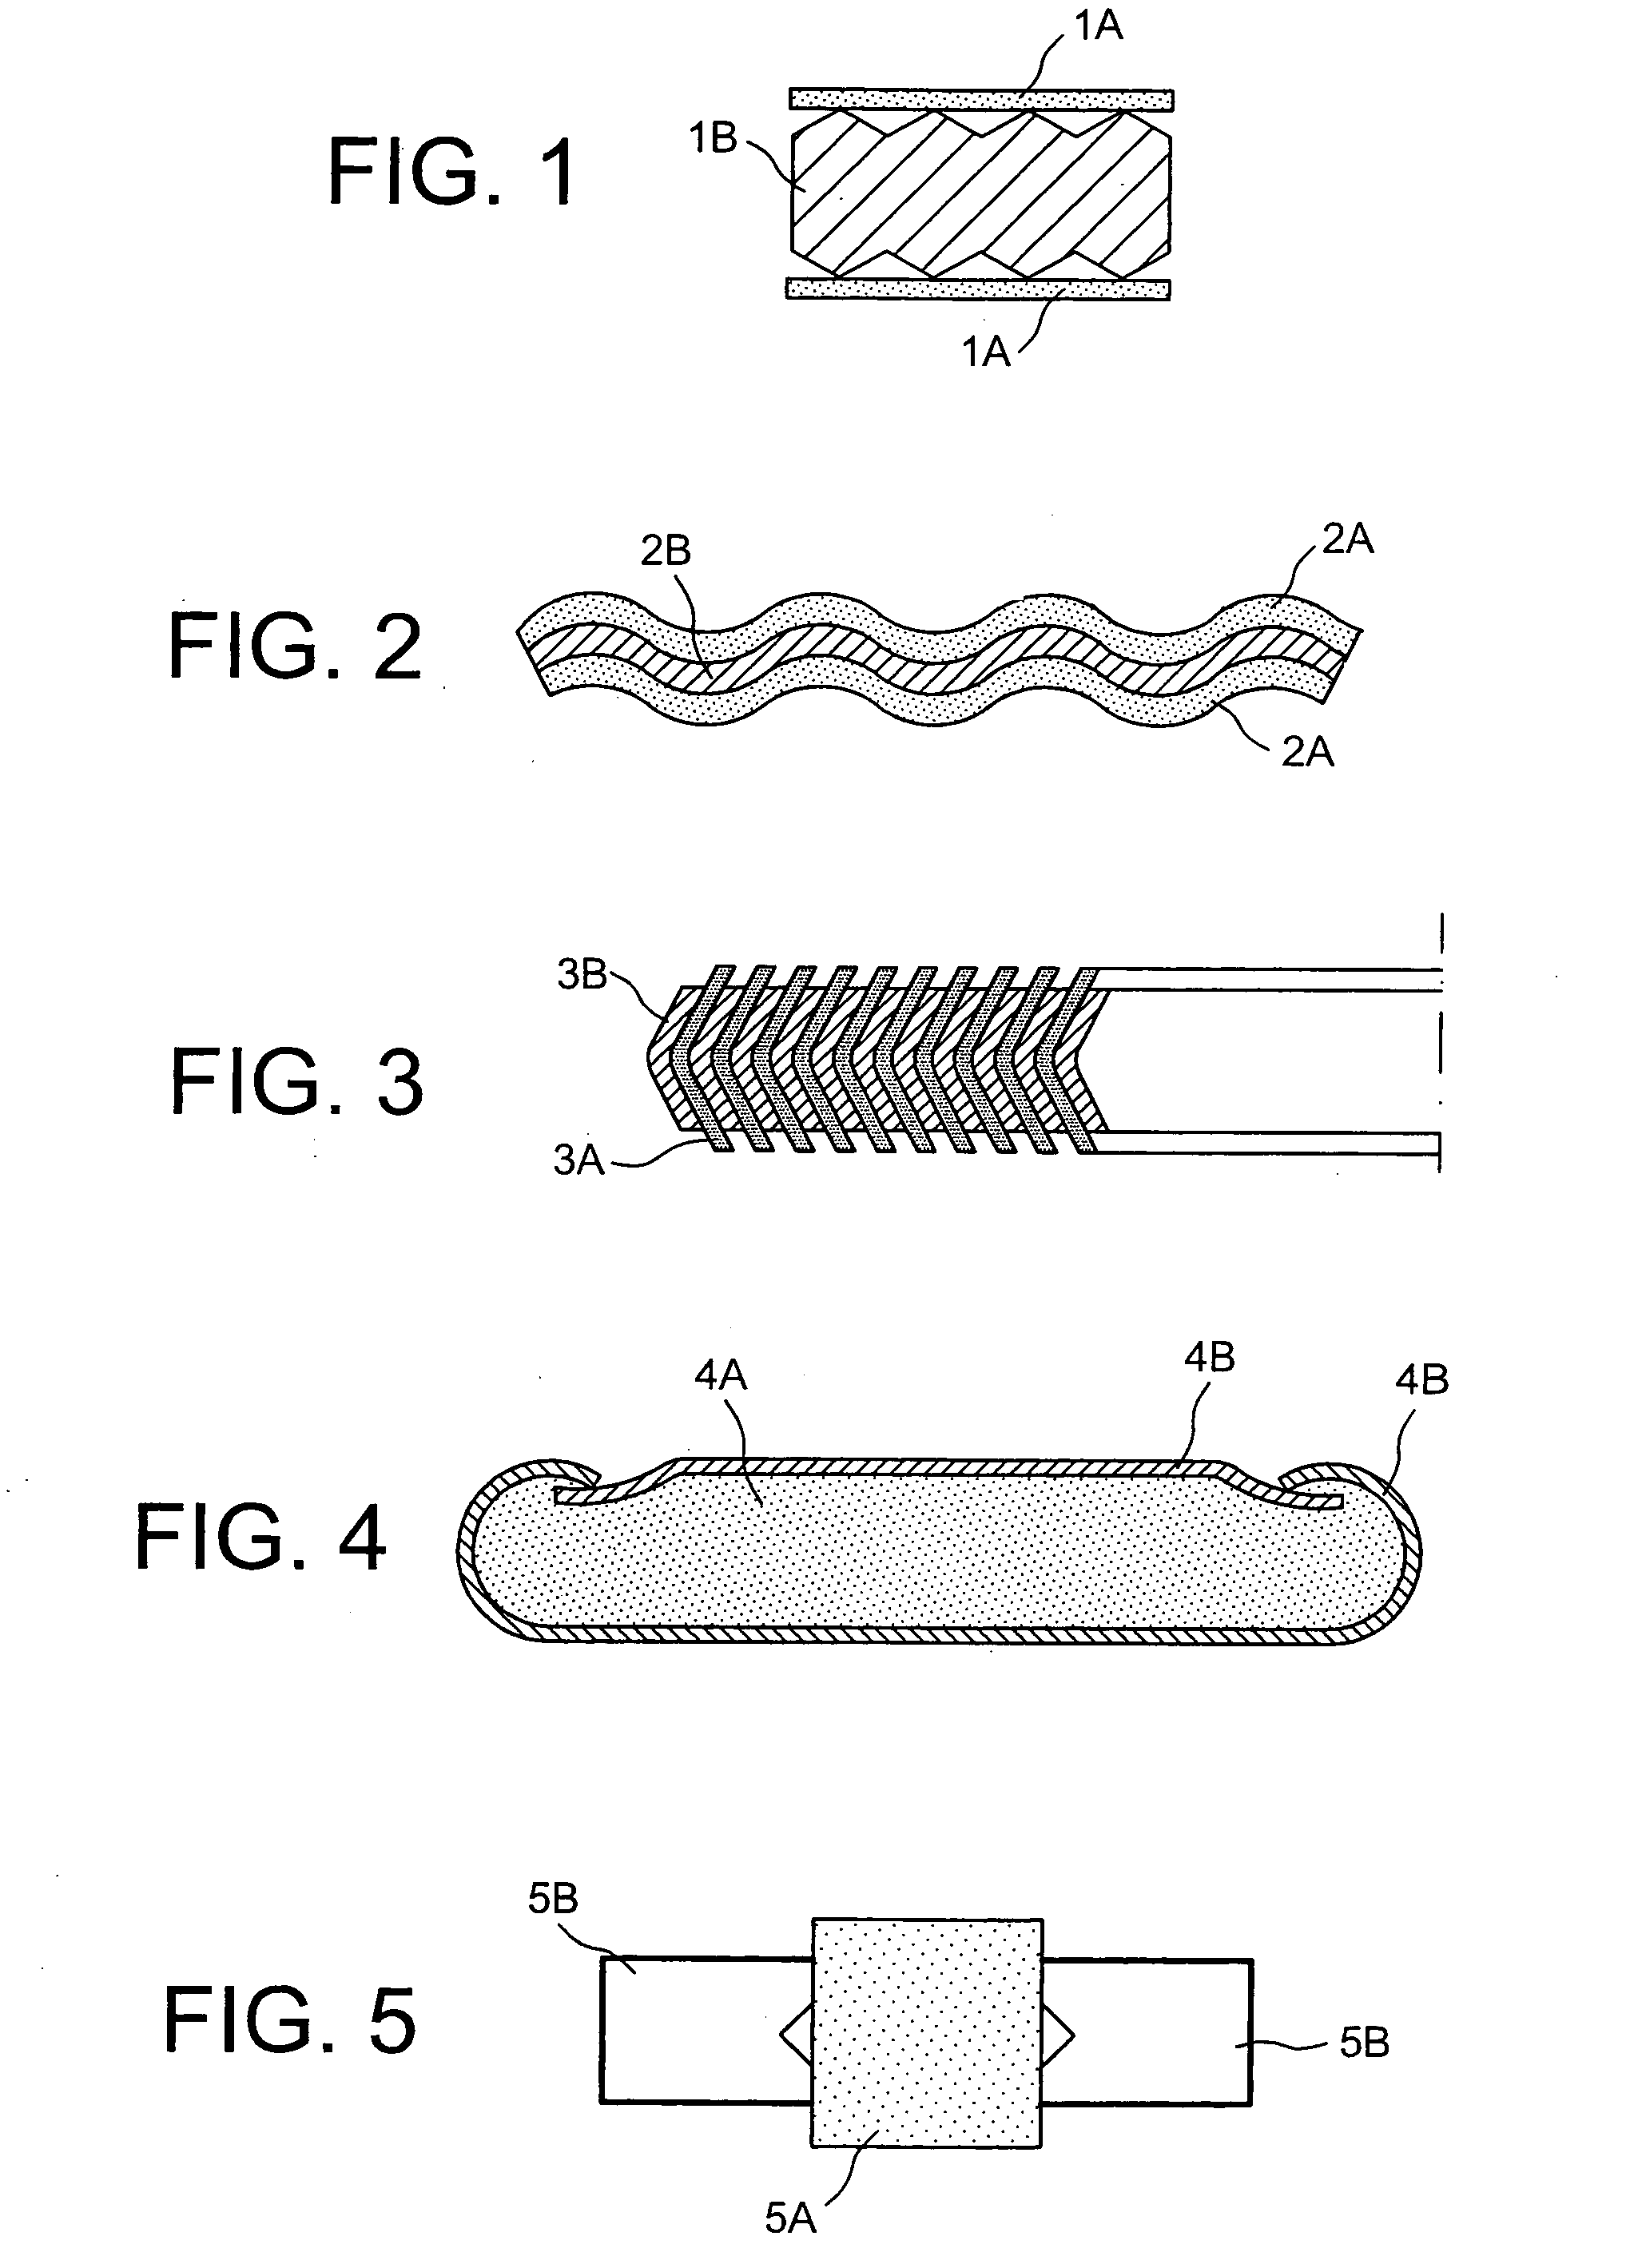 Flexible graphite sealing joint with metal jacket for high temperature